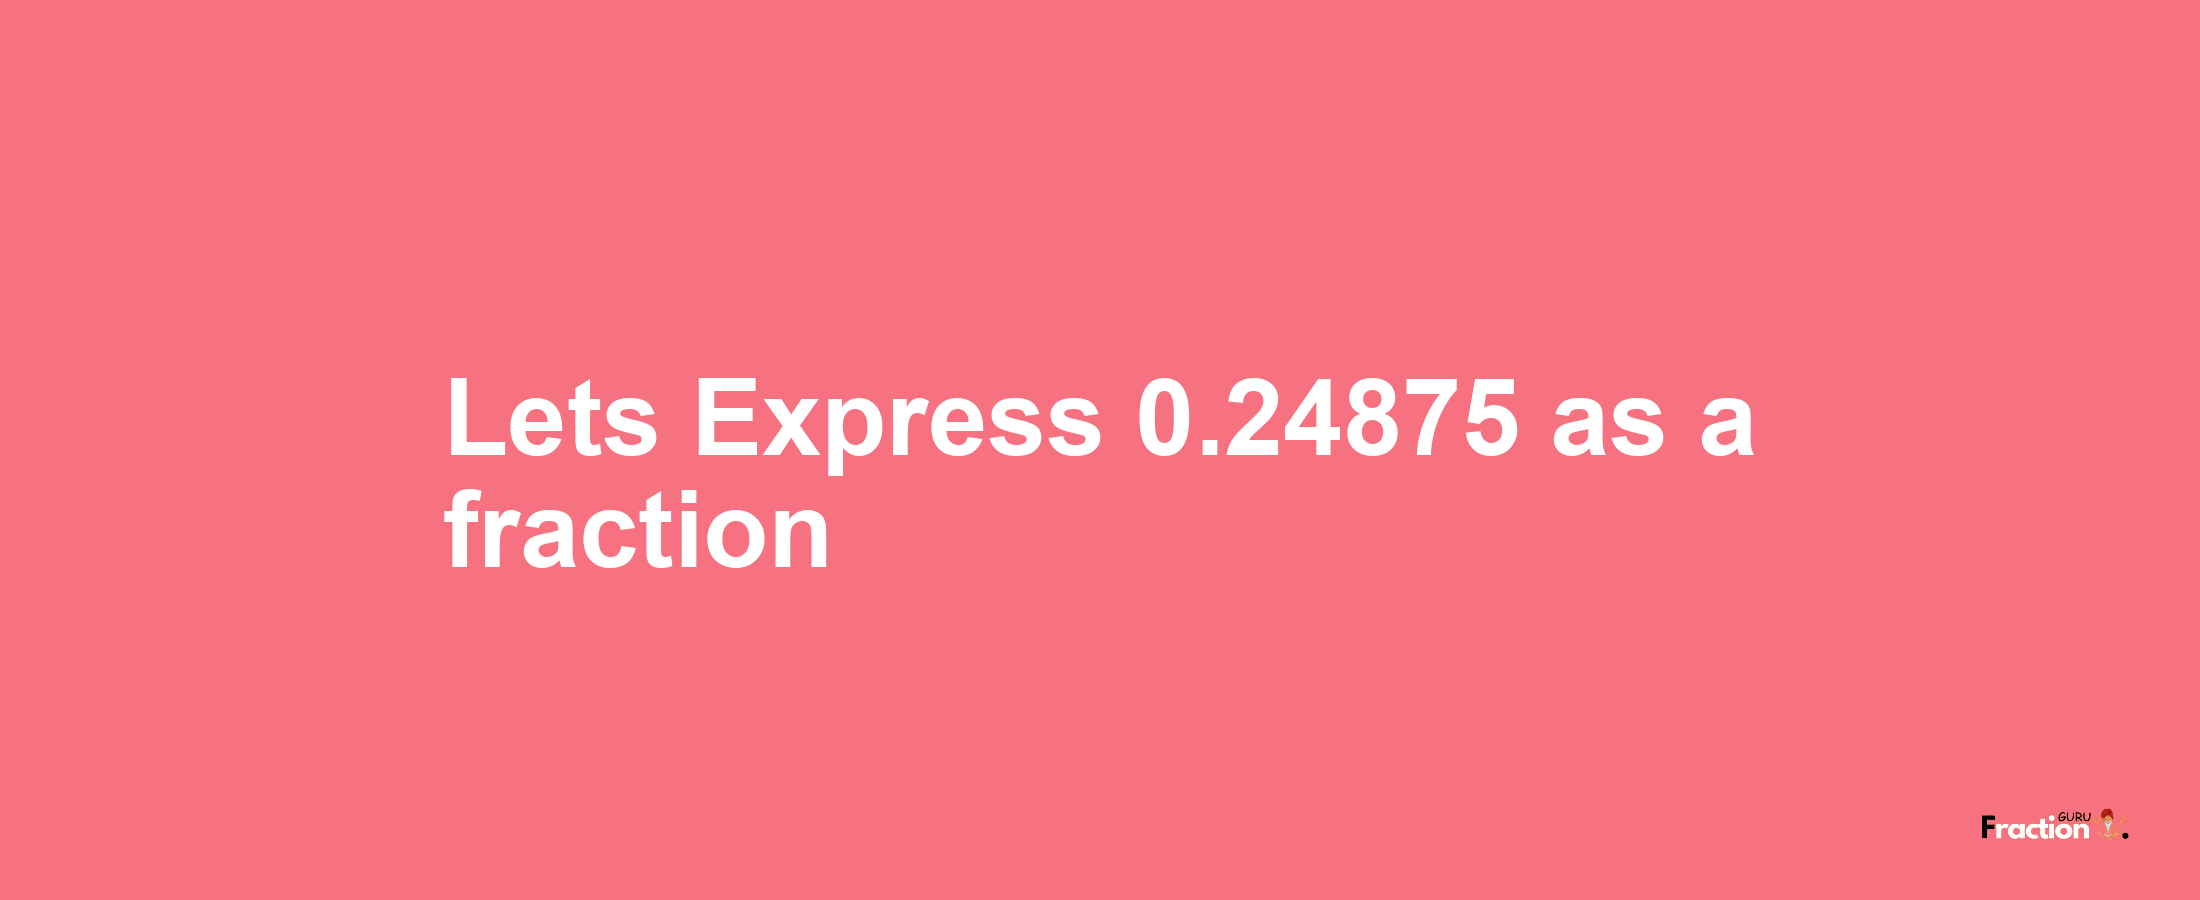 Lets Express 0.24875 as afraction